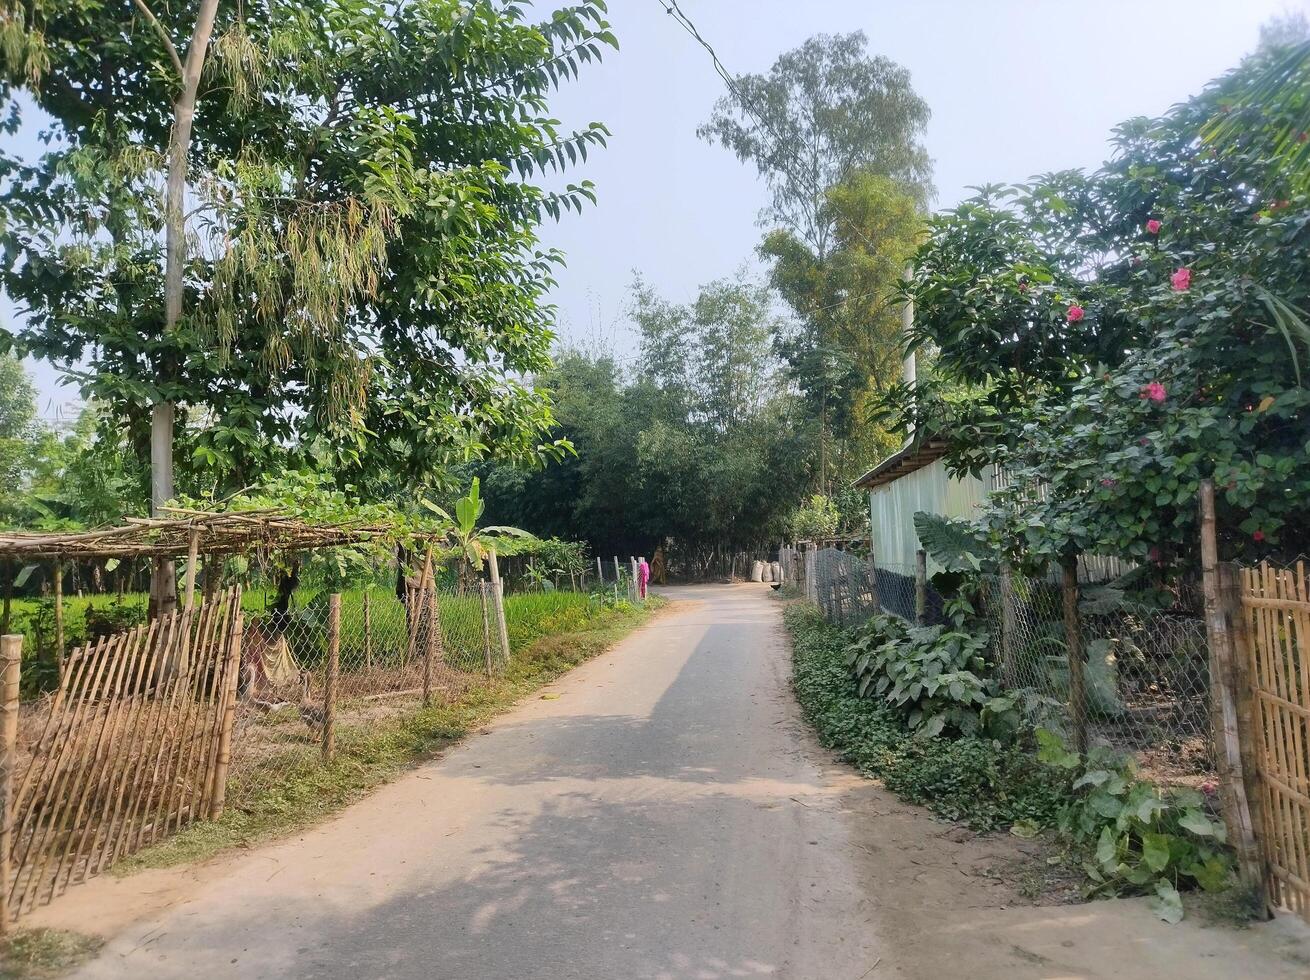 A beautiful small street in a village in Bangladesh photo